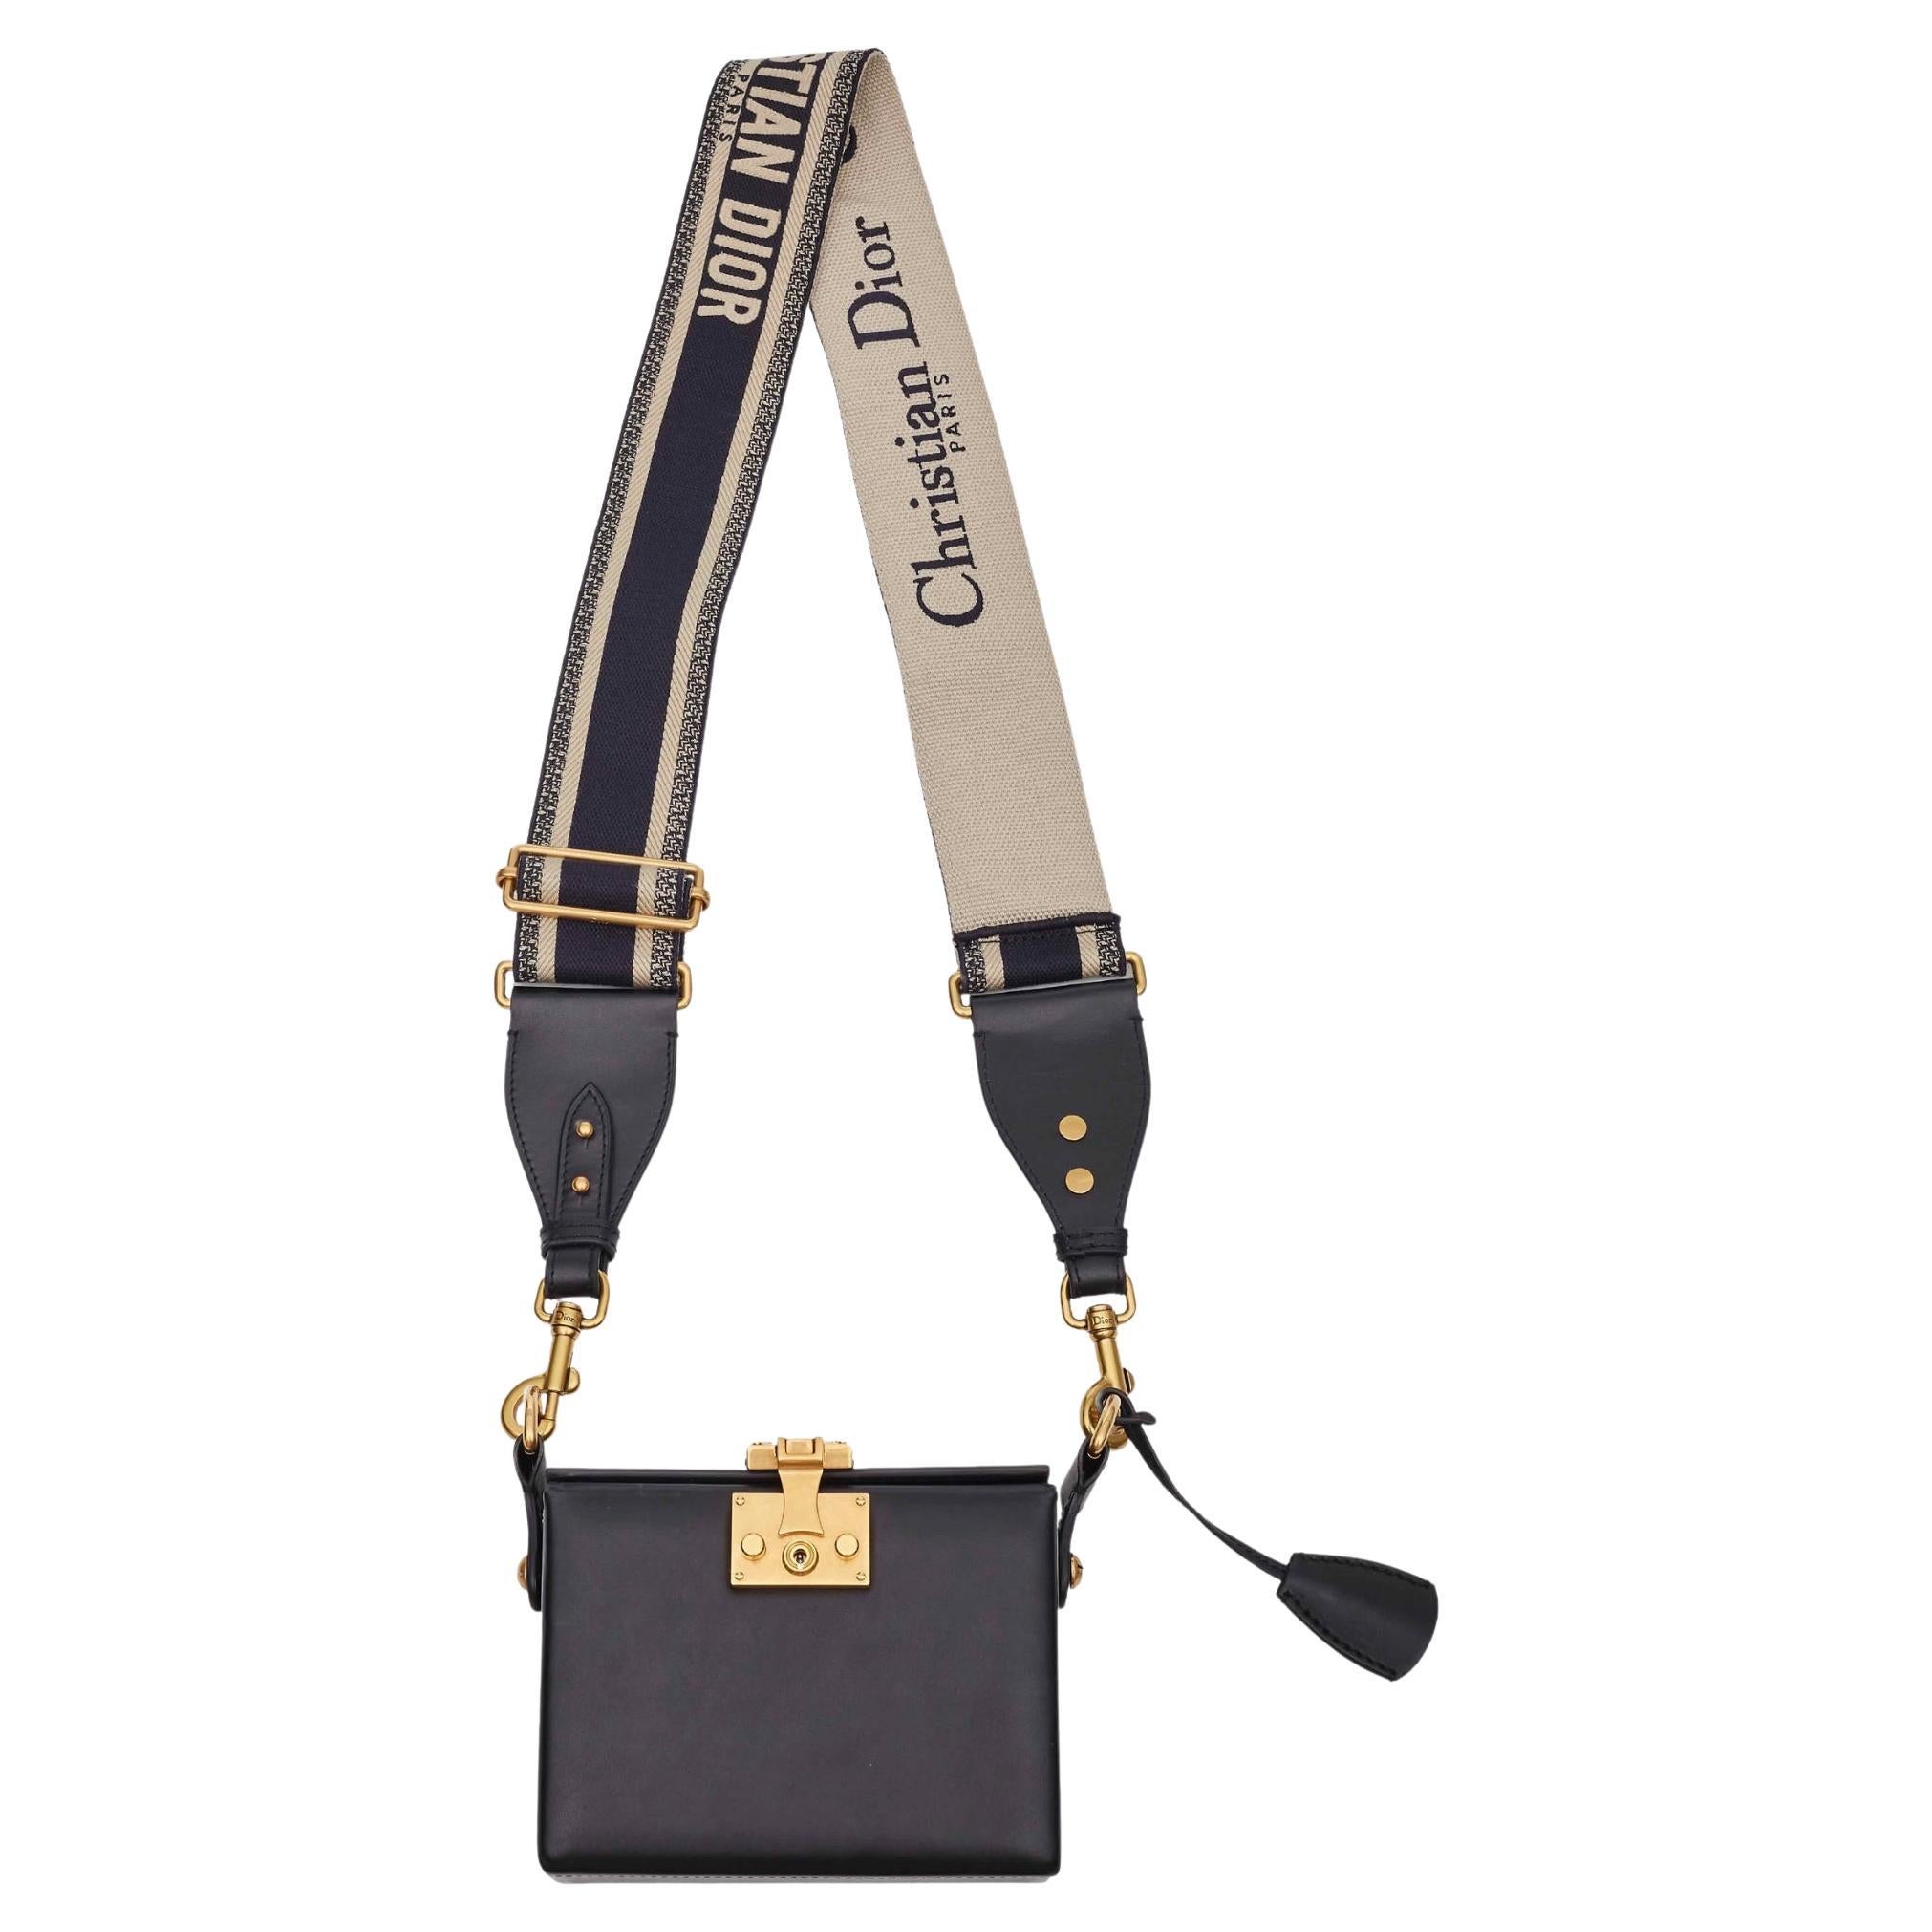 How do you wear the strap on a Dior Saddle bag?